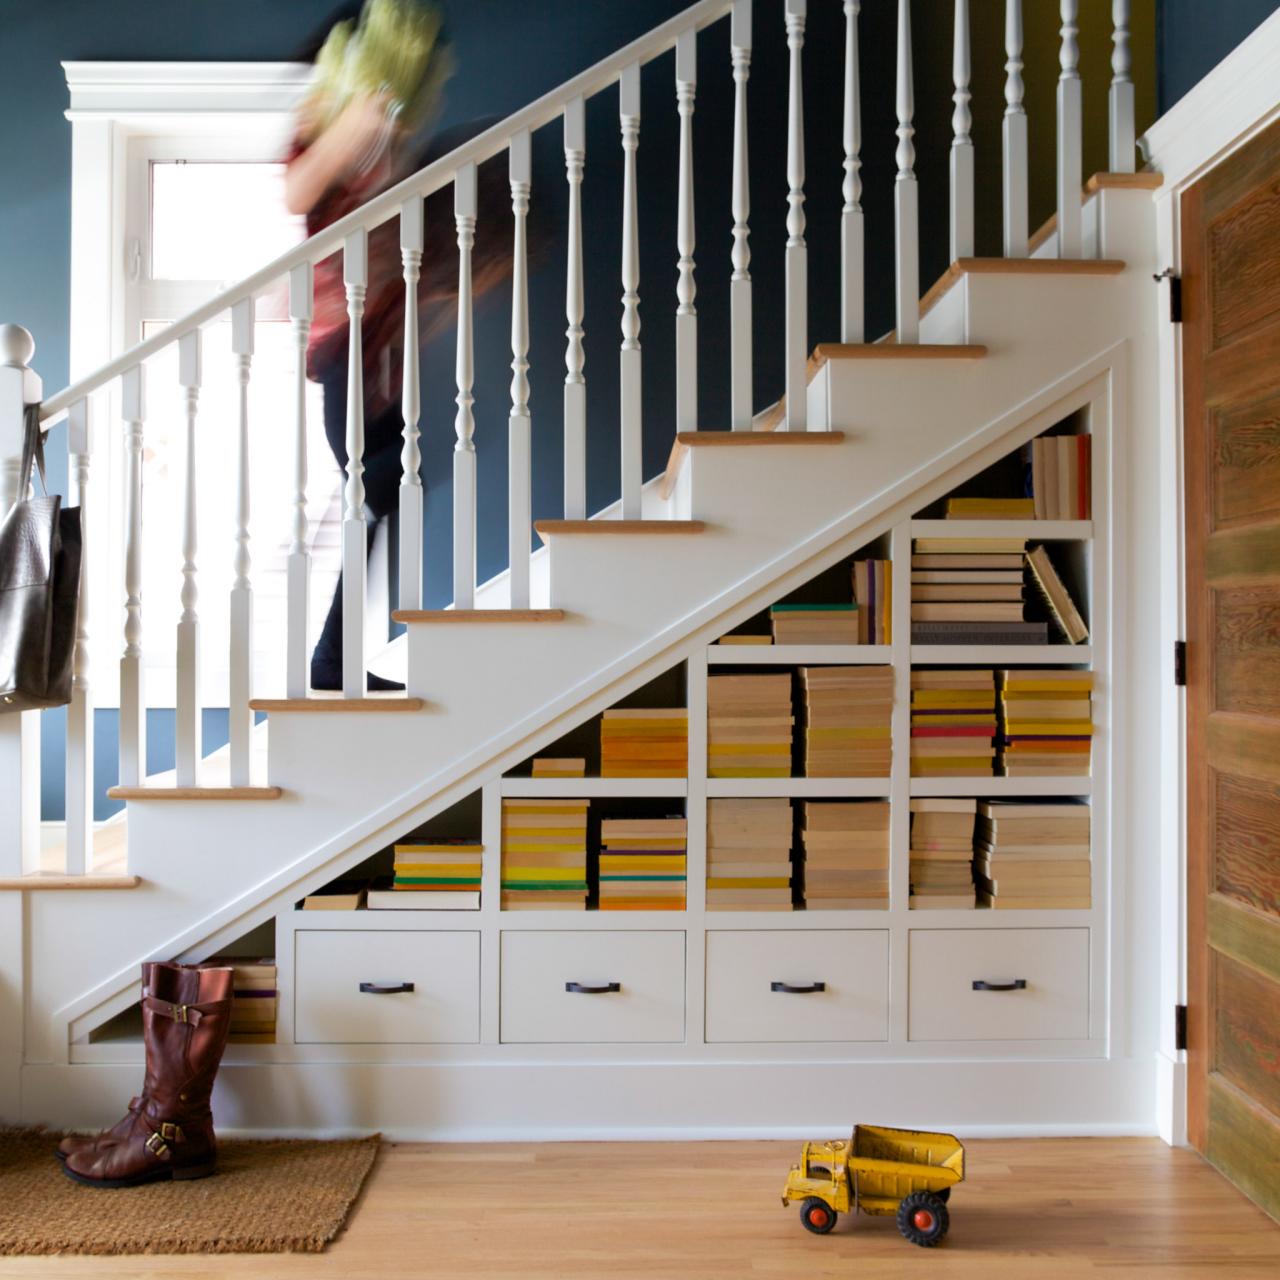 11 Ways To Maximize The Space Under The Stairs – Forbes Home